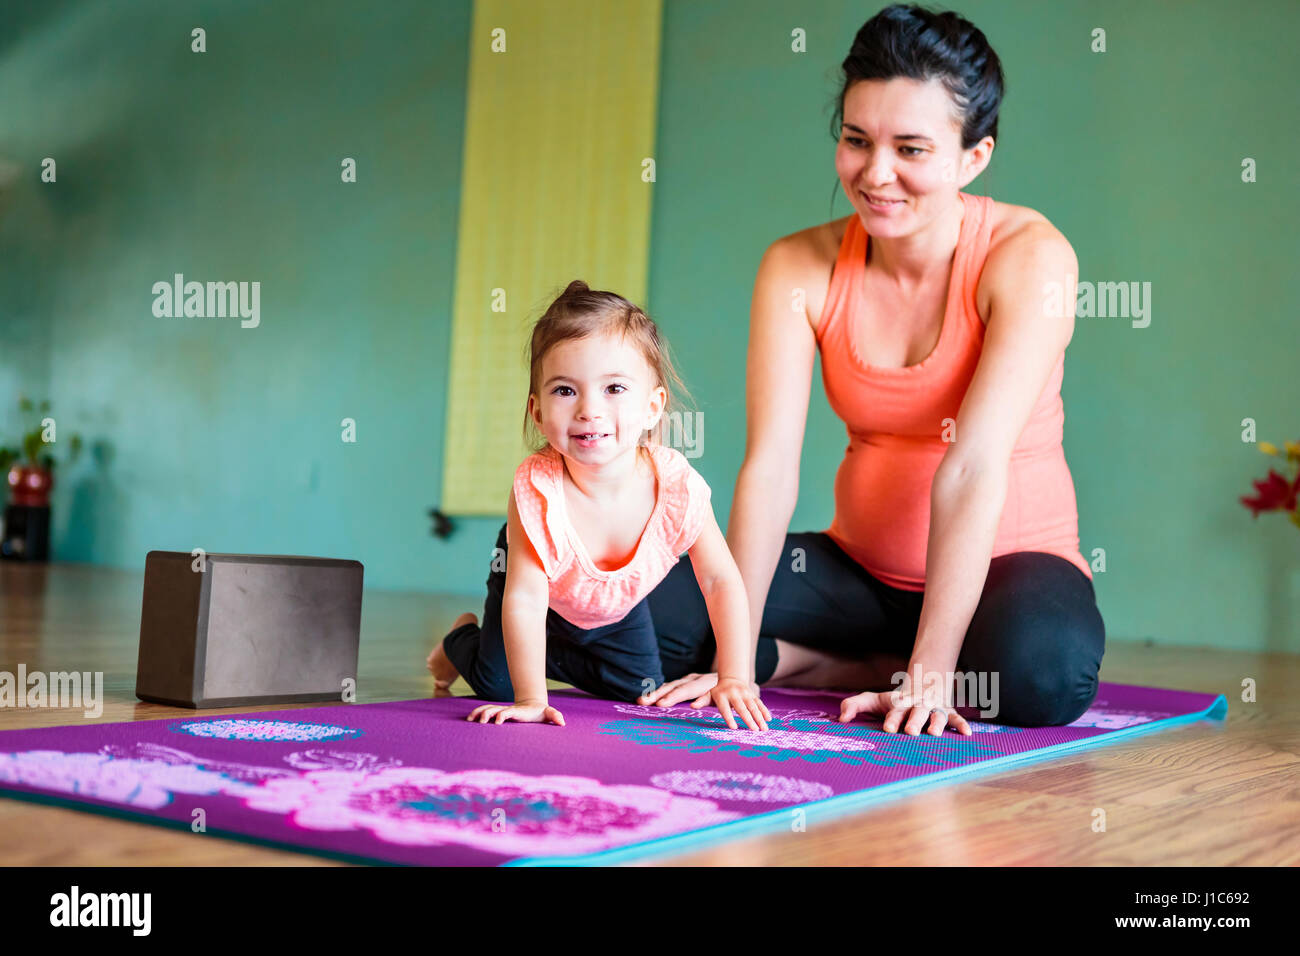 Mixed Race expectant mother and daughter on exercise mat Stock Photo